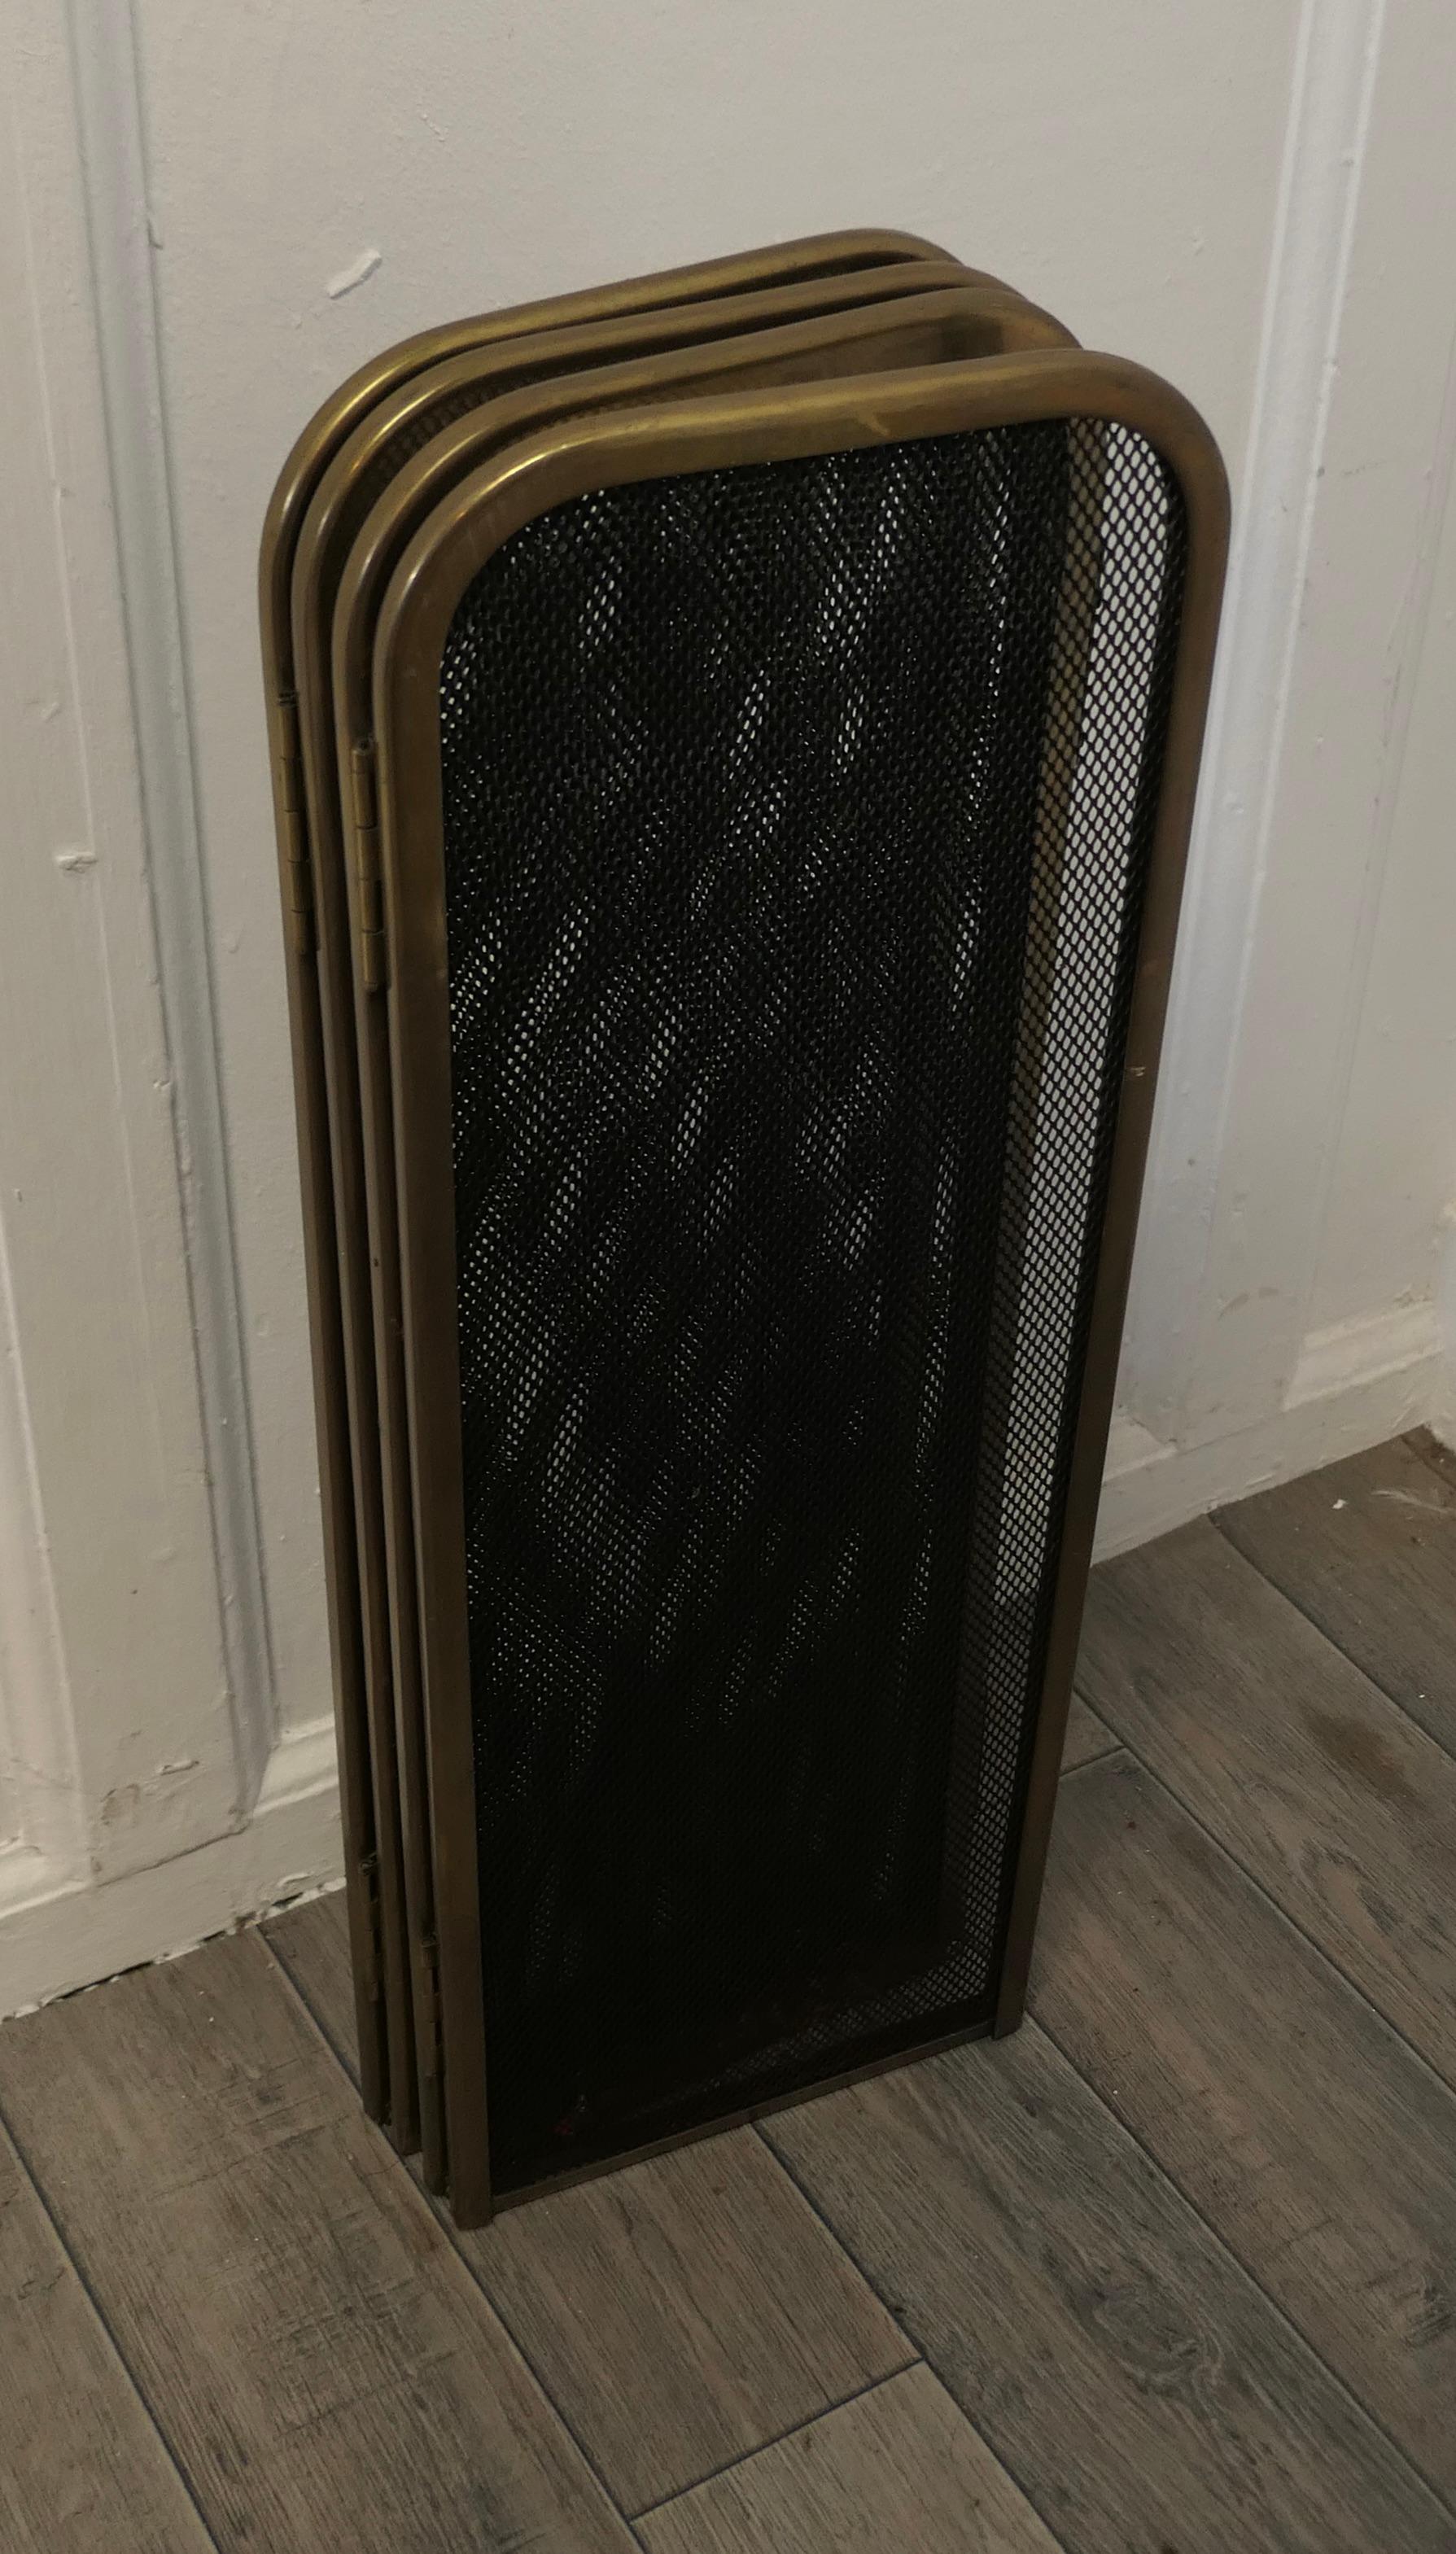 Art Deco 4 Fold Brass Fire Guard Screen This Very Useful Spark Guard For Sale